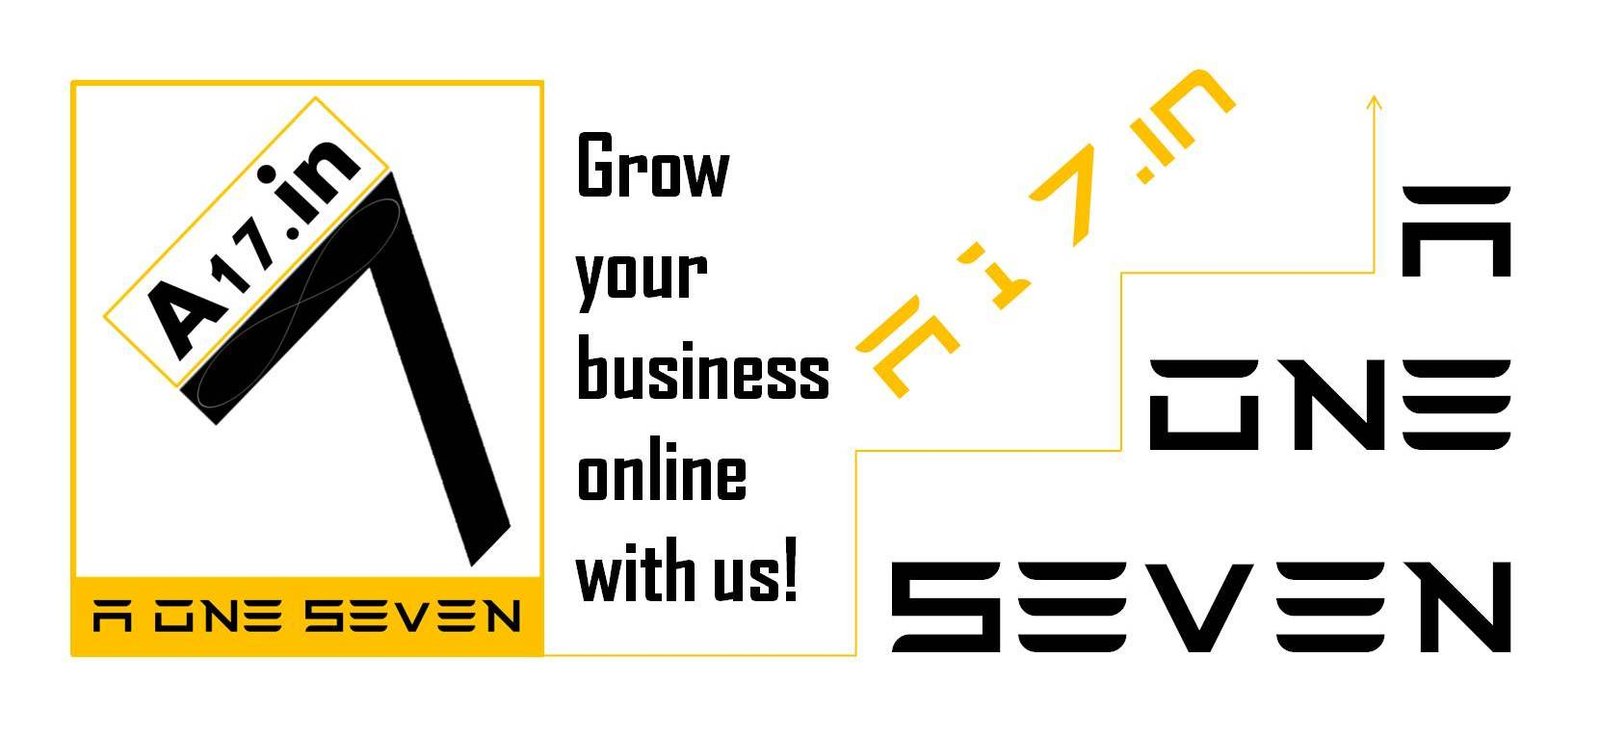 grow-your-business-online-with-a17